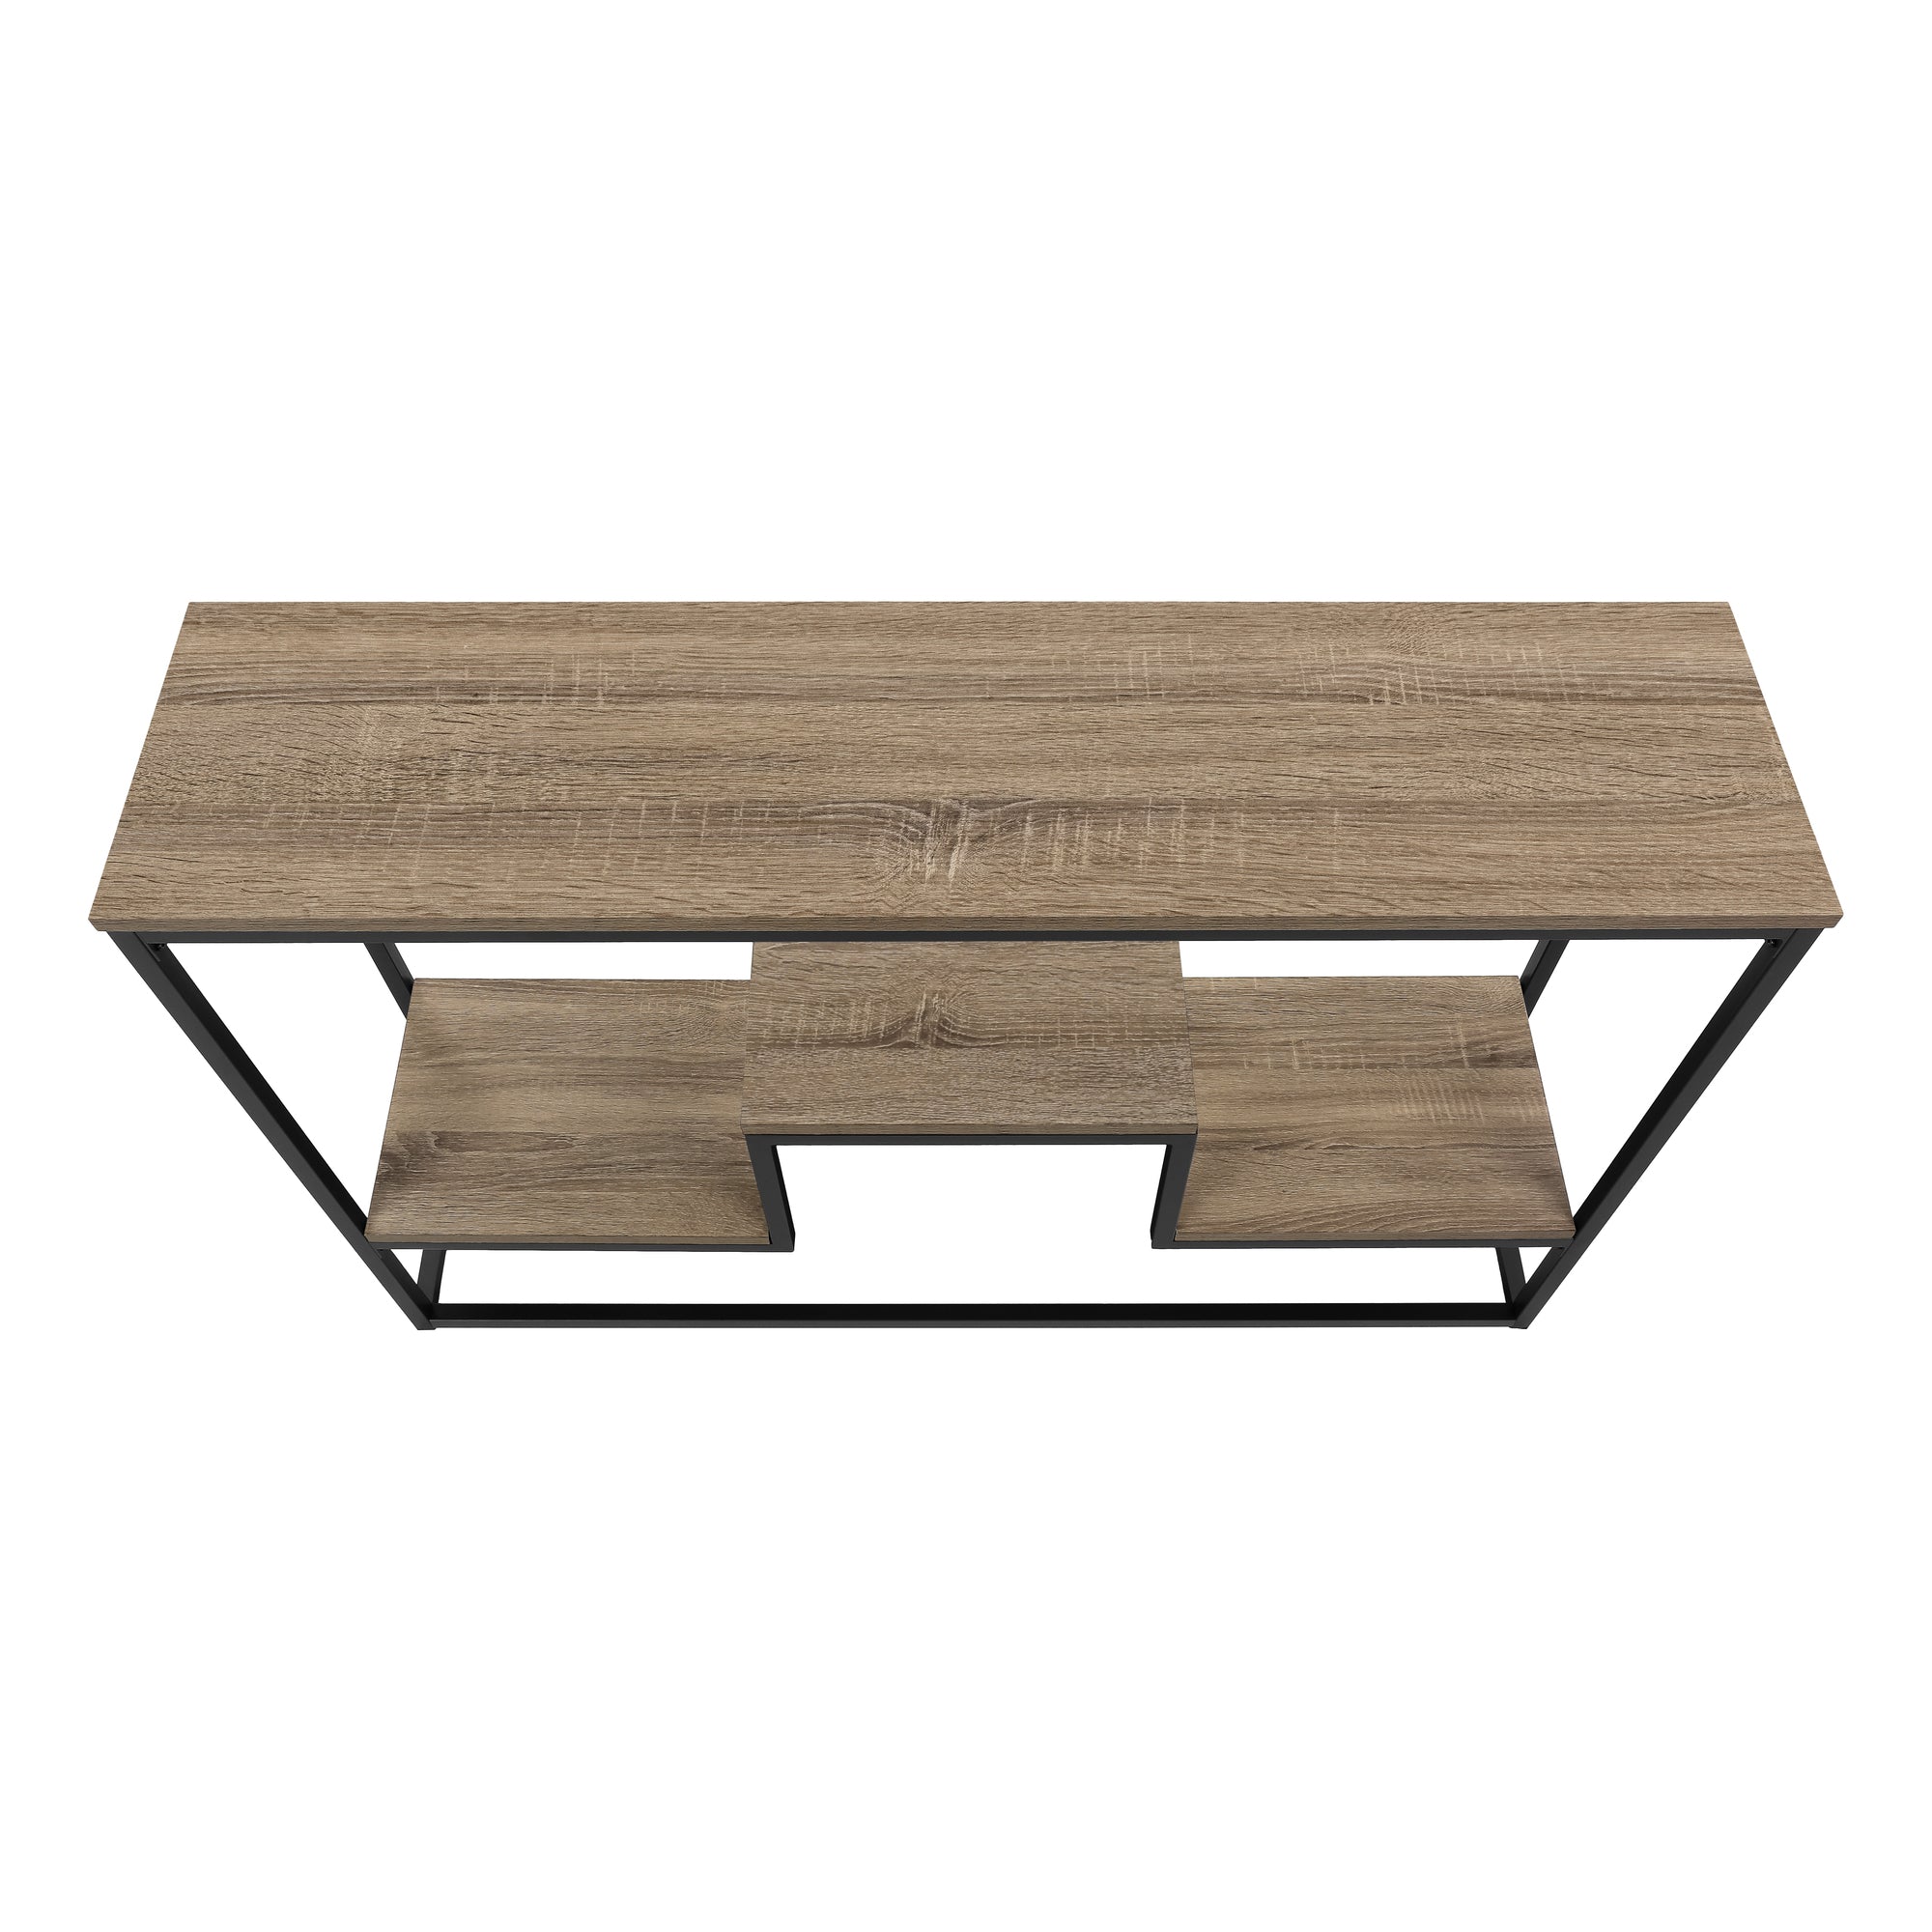 MN-443581    Accent Table, Console, Entryway, Narrow, Sofa, Living Room, Bedroom, Metal Frame, Laminate, Dark Taupe, Black, Contemporary, Modern